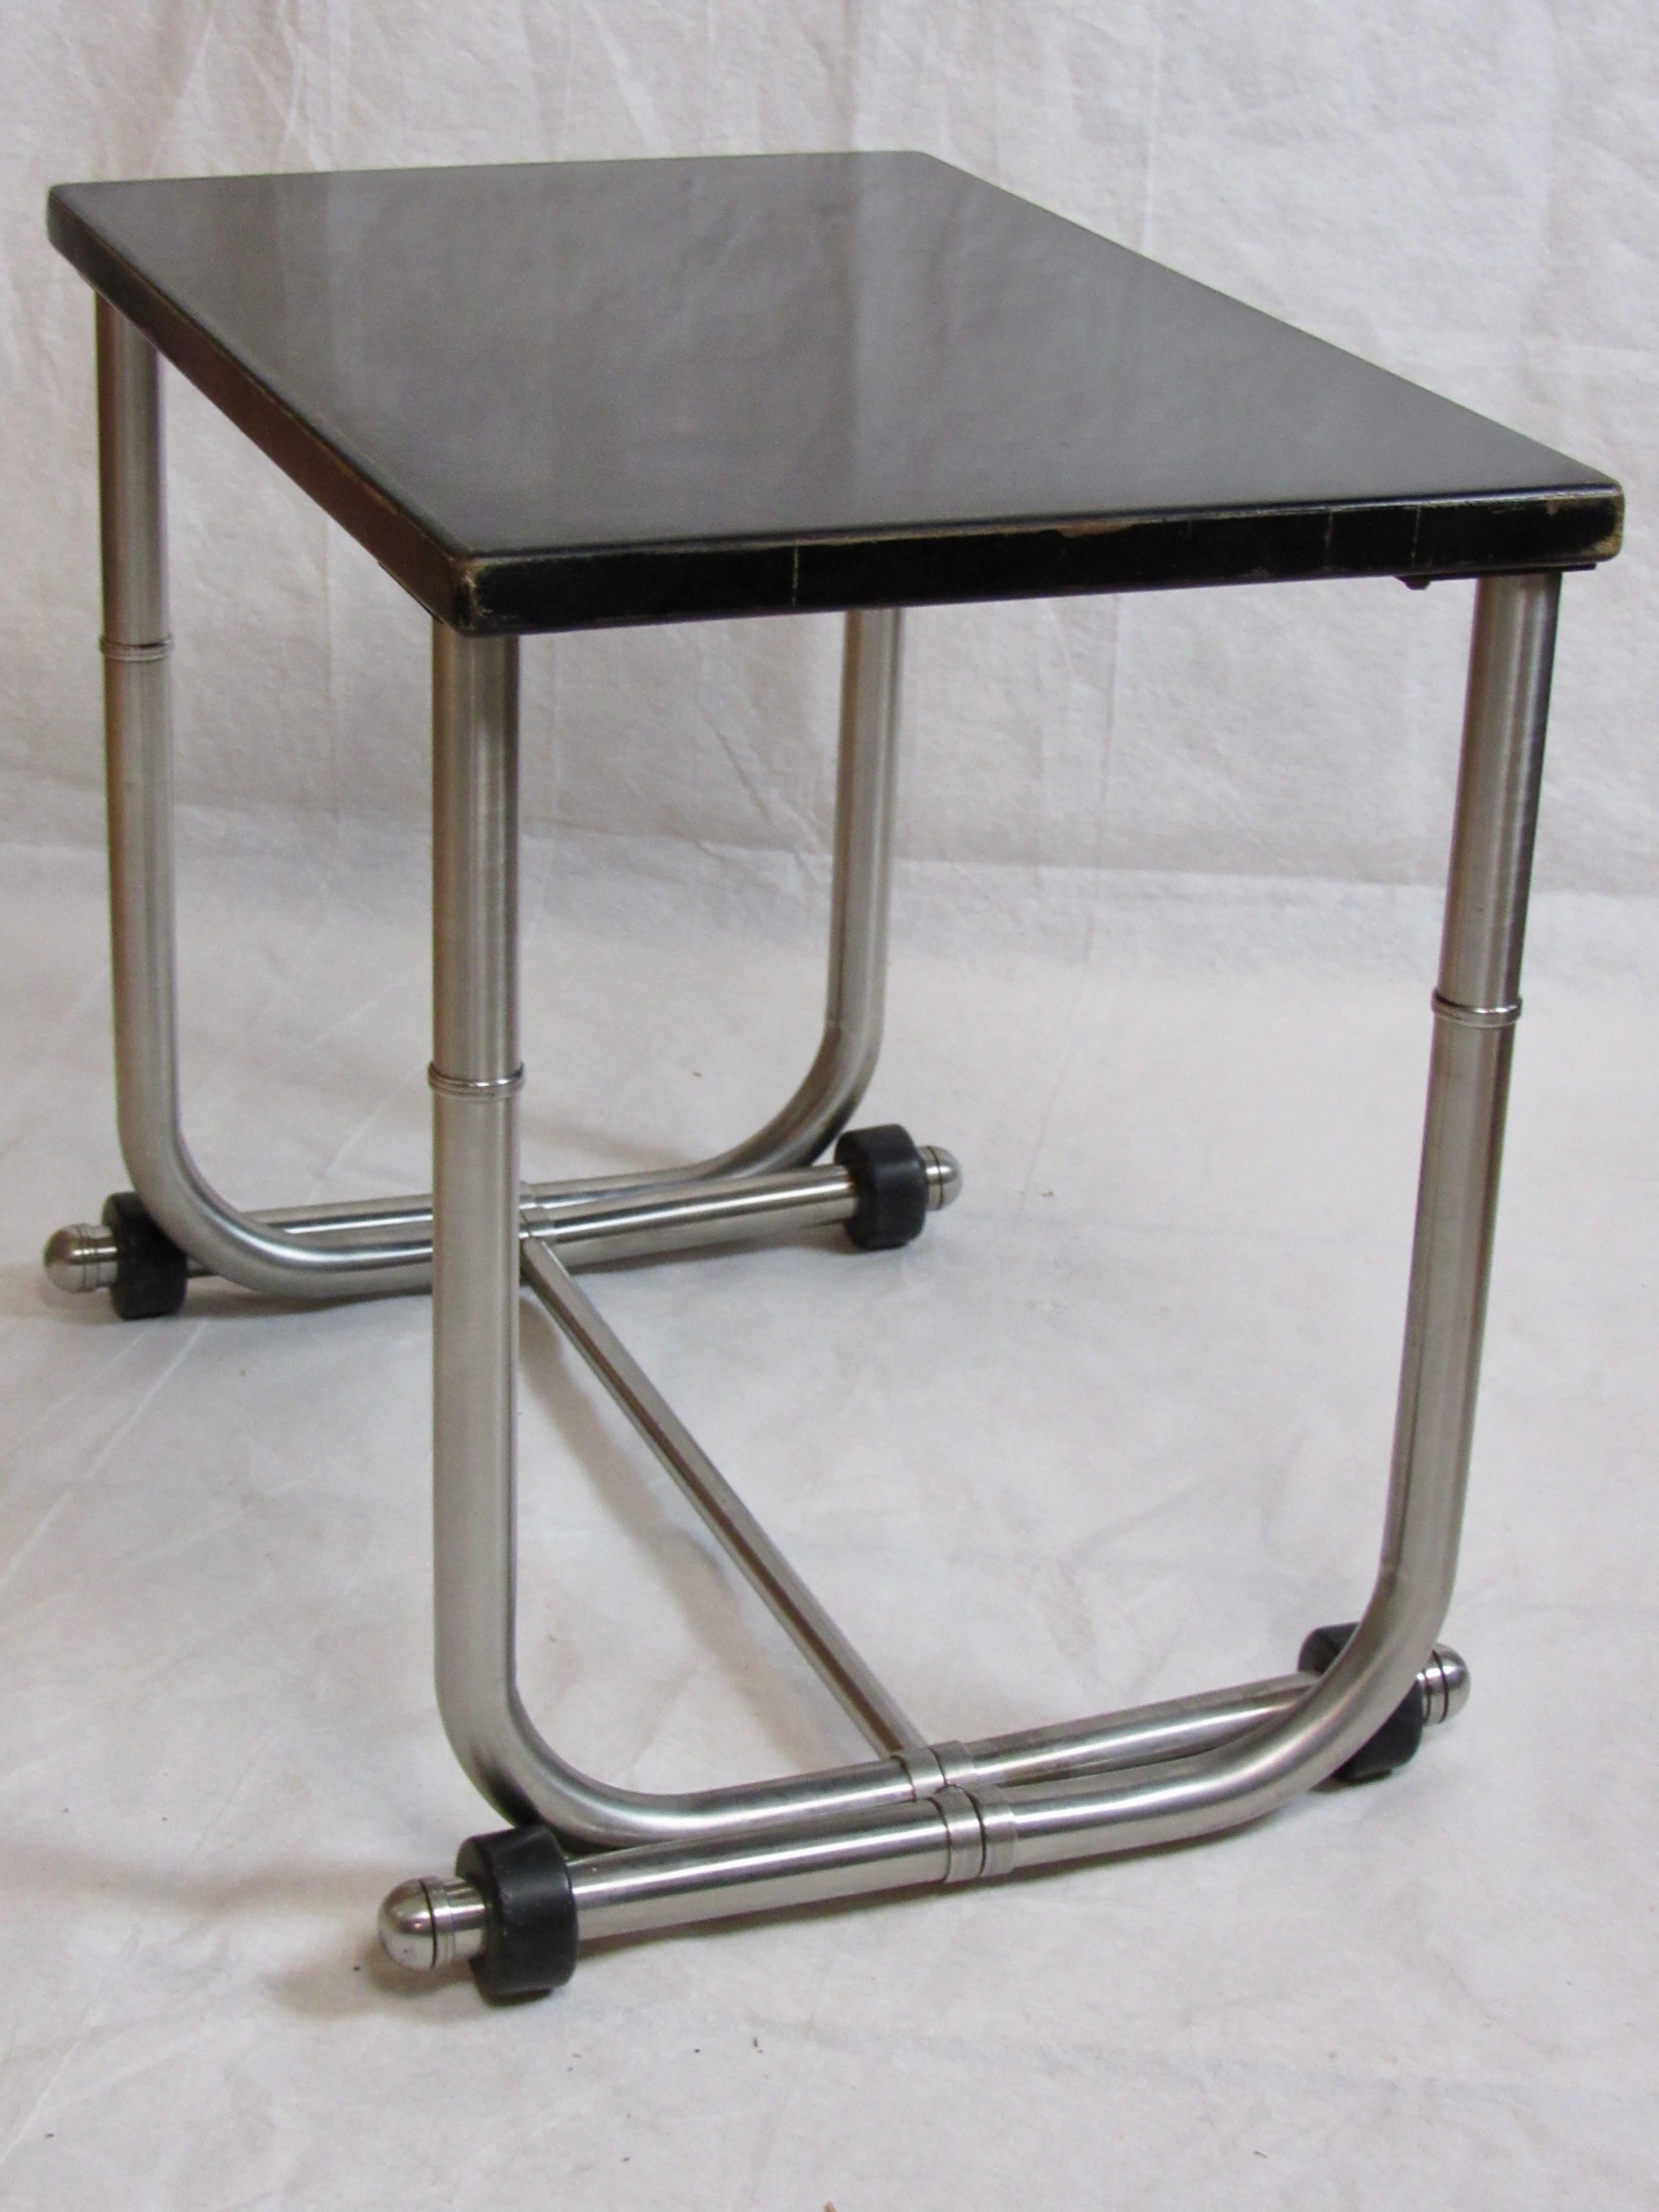 Machine-Made Unique Side Table Warren McArthur Stainless Steel Frame, 1934-1935